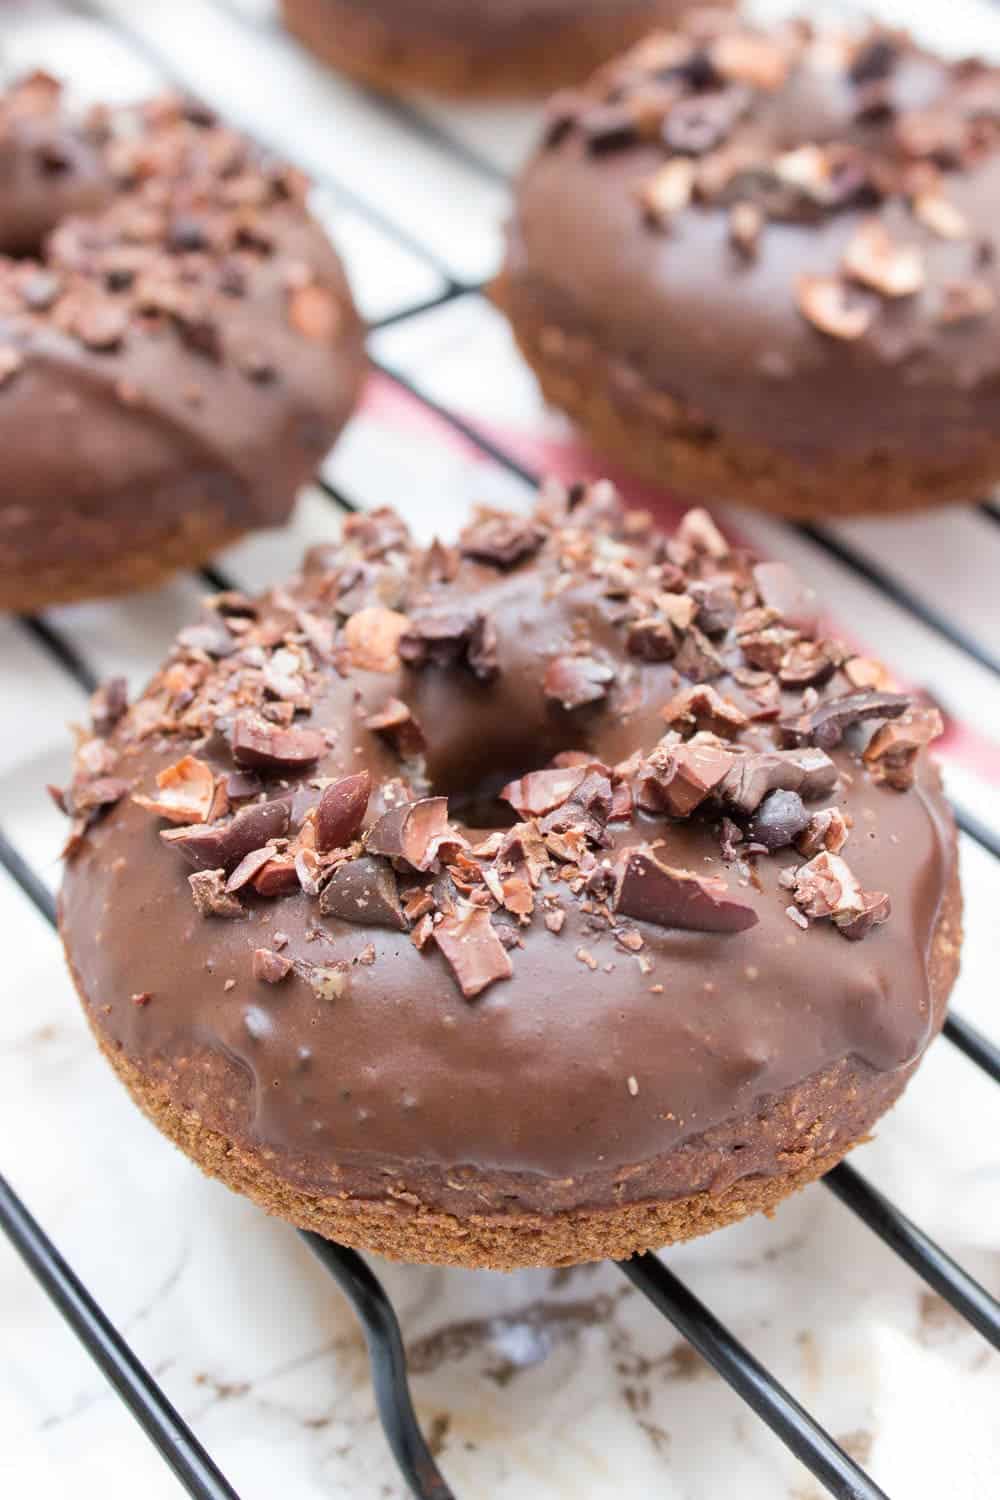 chocolate banana donuts glazed with chocolate and topped with chocolate chunks on a black cooling rack.